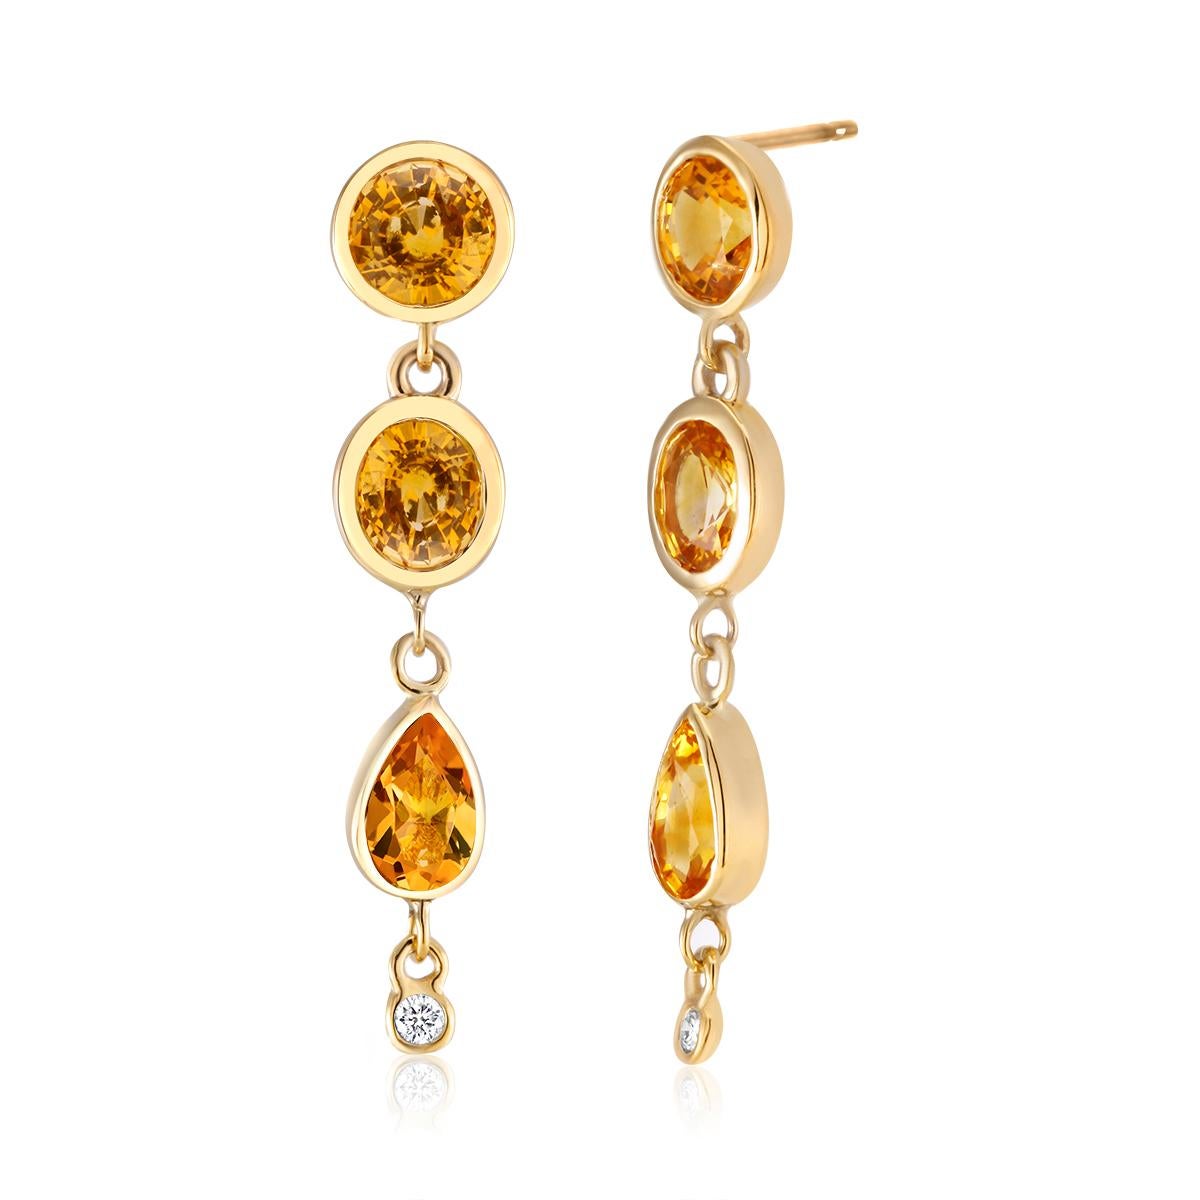 Pear Cut Diamond and Yellow Sapphire Gold Drop Earrings Weighing 6.33 Carat